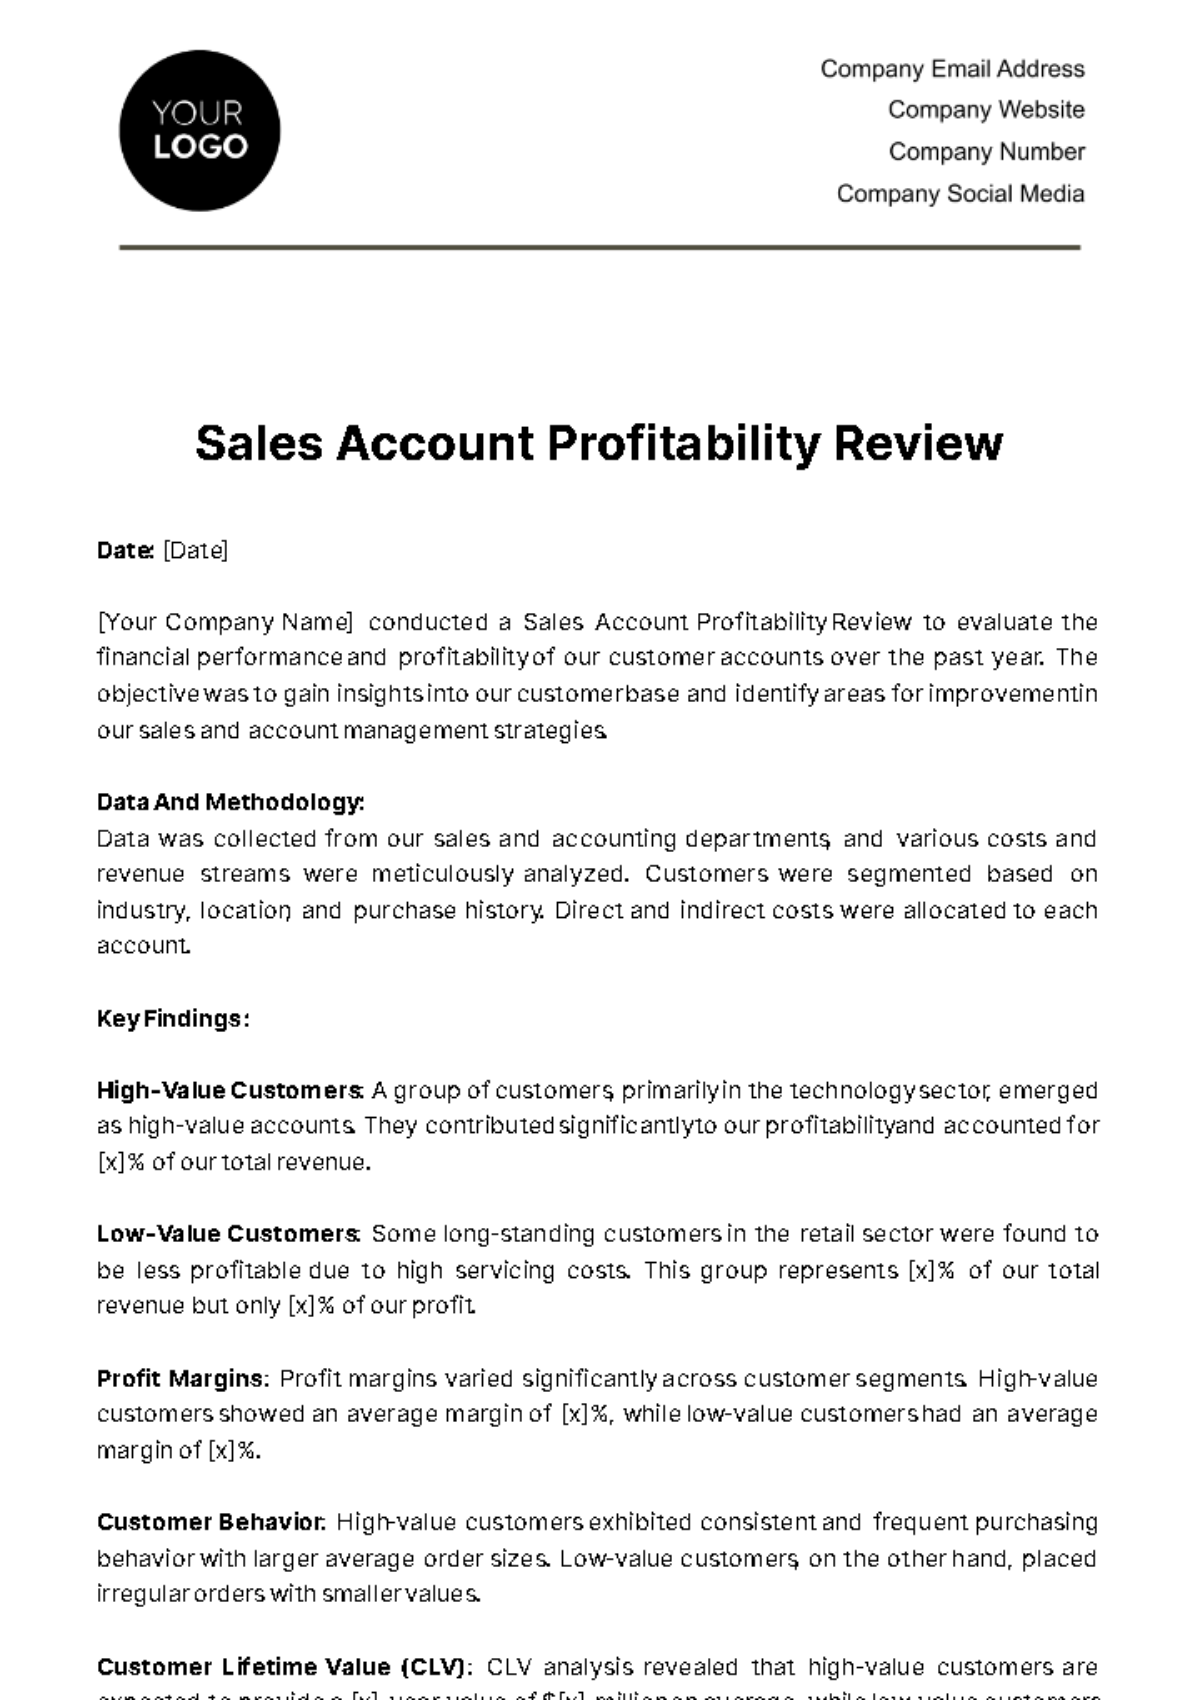 Free Sales Account Profitability Review Template